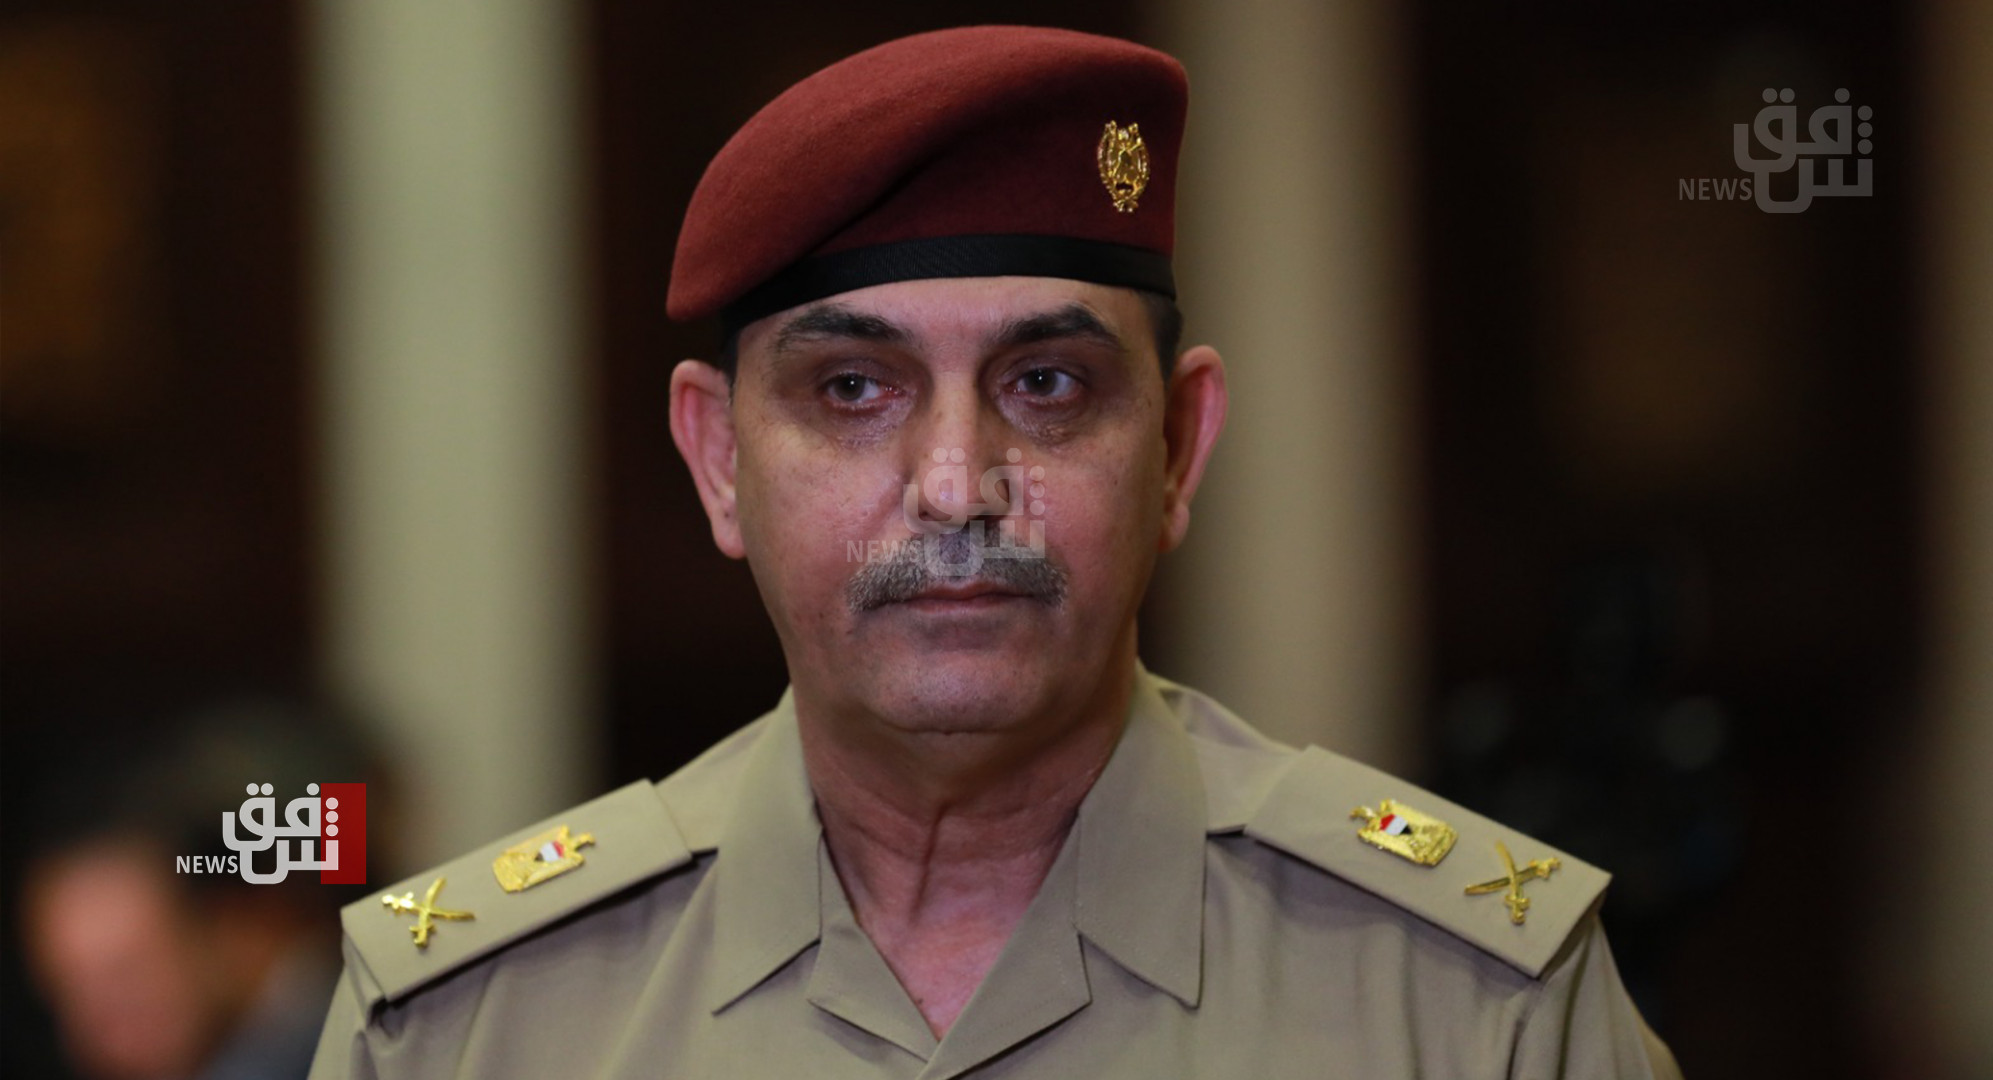 For holding Baghdad Conference, Iraq's security forces closed all the entrances of Green Zone